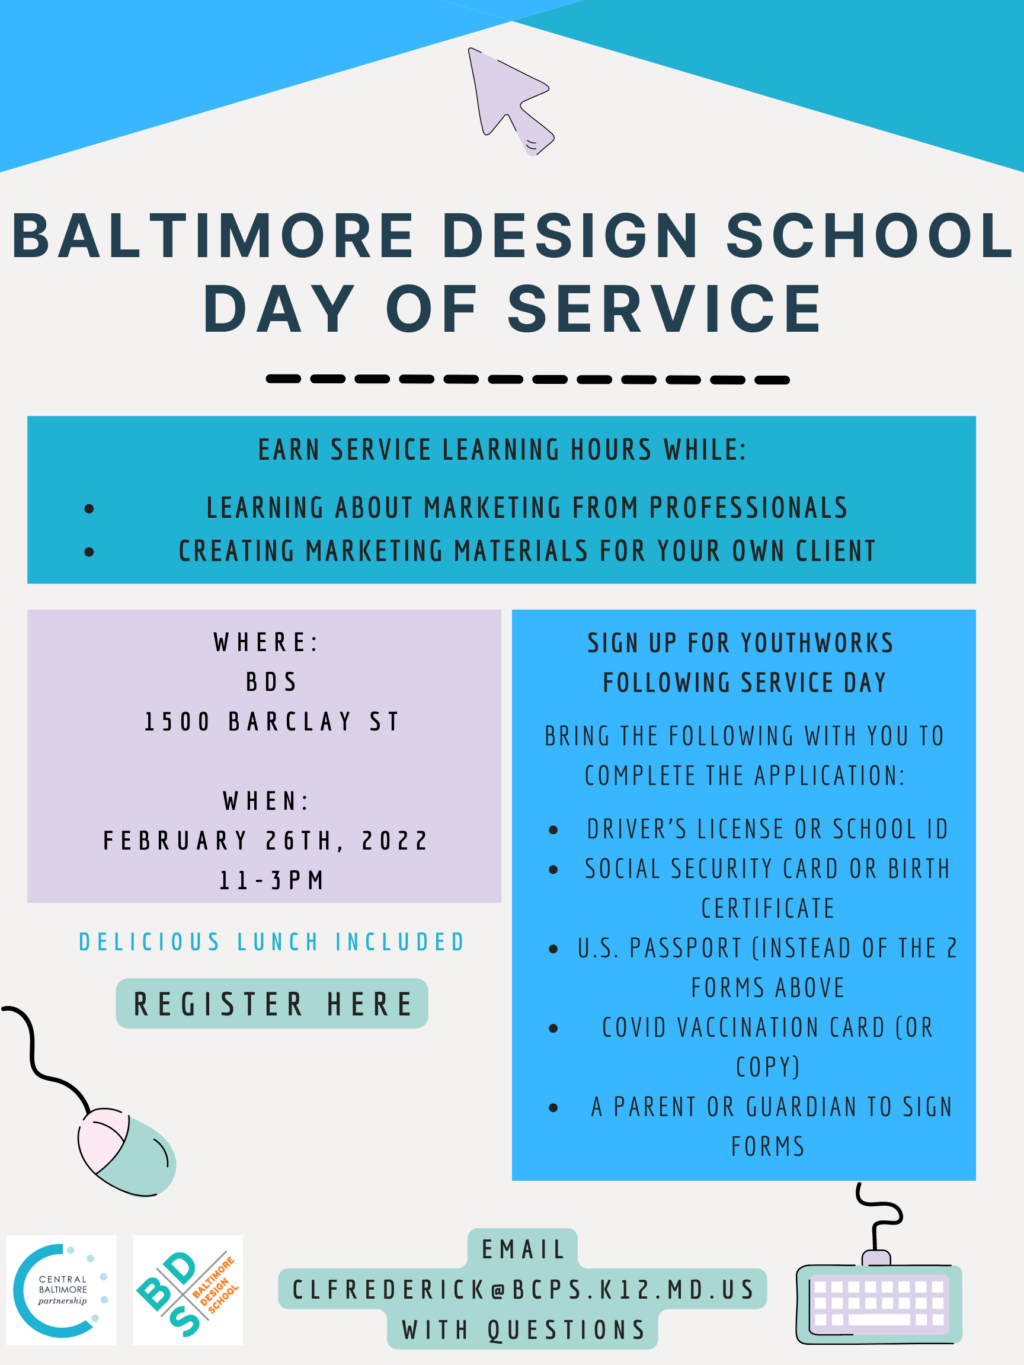 Service Learning Project: BDS & Central Baltimore Partnership DESIGN Day! Earn 10 hrs Designing for non-profits!!